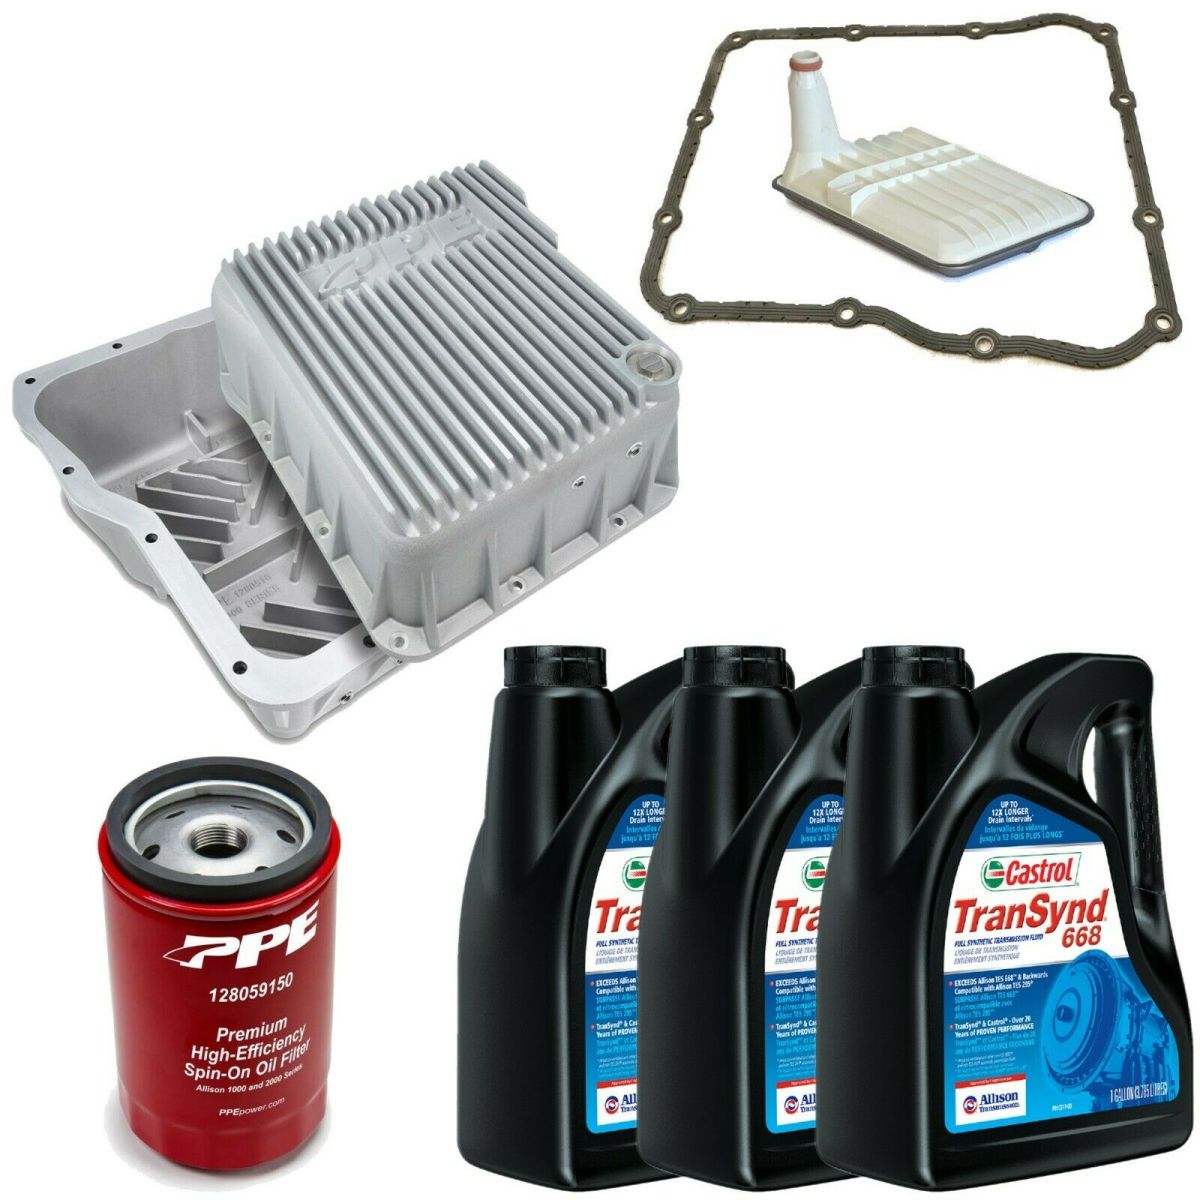 PPE - ACDelco Allison 1000 Transmission Service Kit & PPE Deep Pan For 01-19 GM Trucks